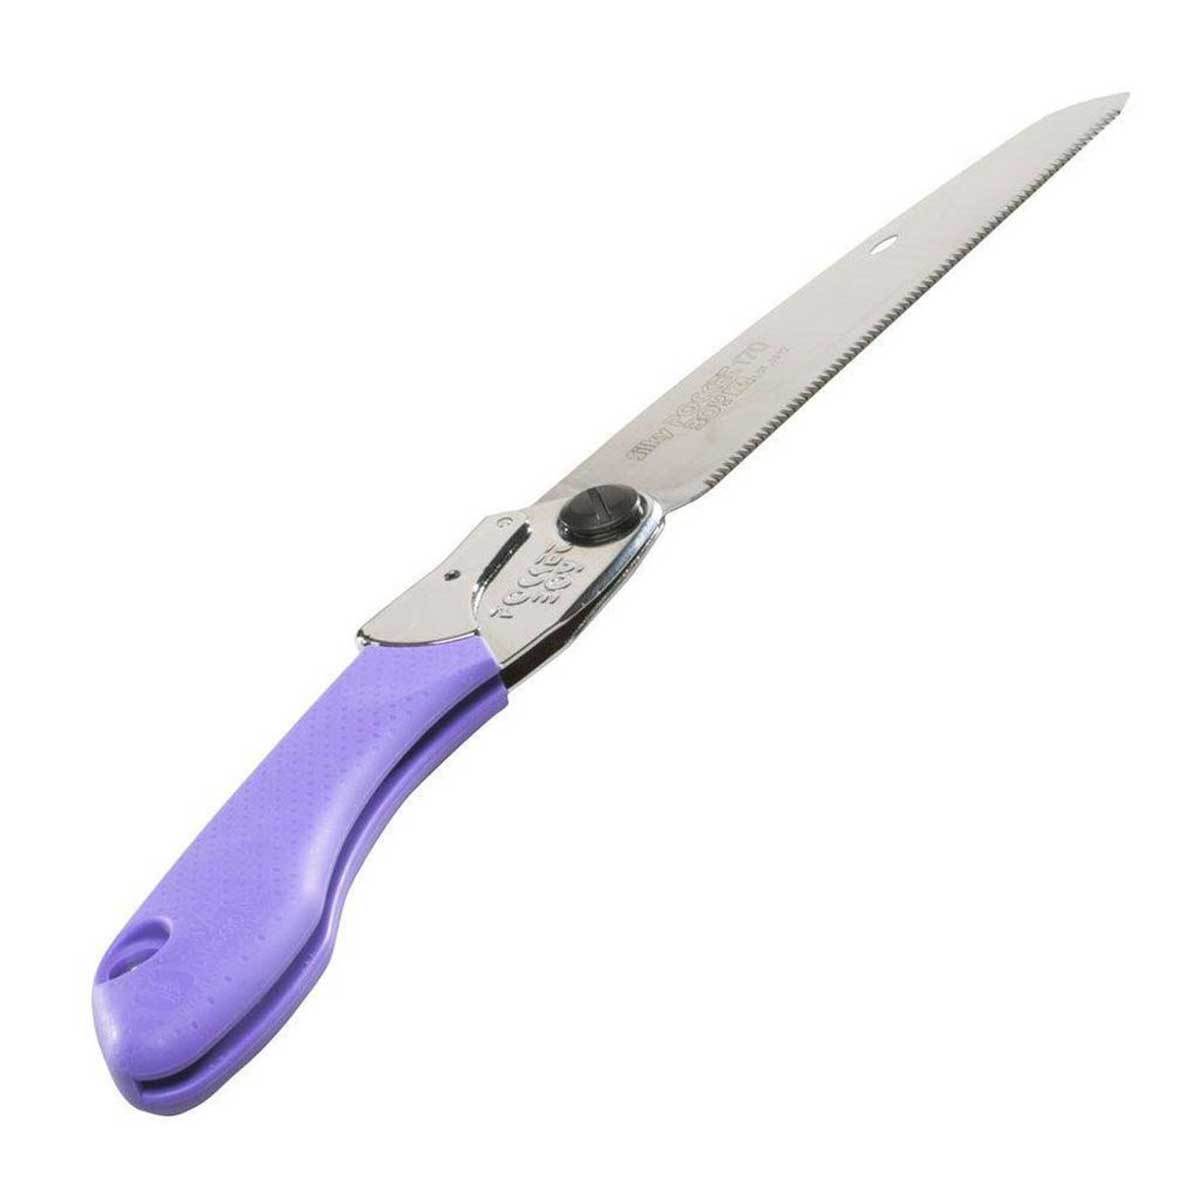 Silky Pocketboy 170 Folding Japanese Saw with purple grip and extra-fine taper ground blade for cutting hardwood.